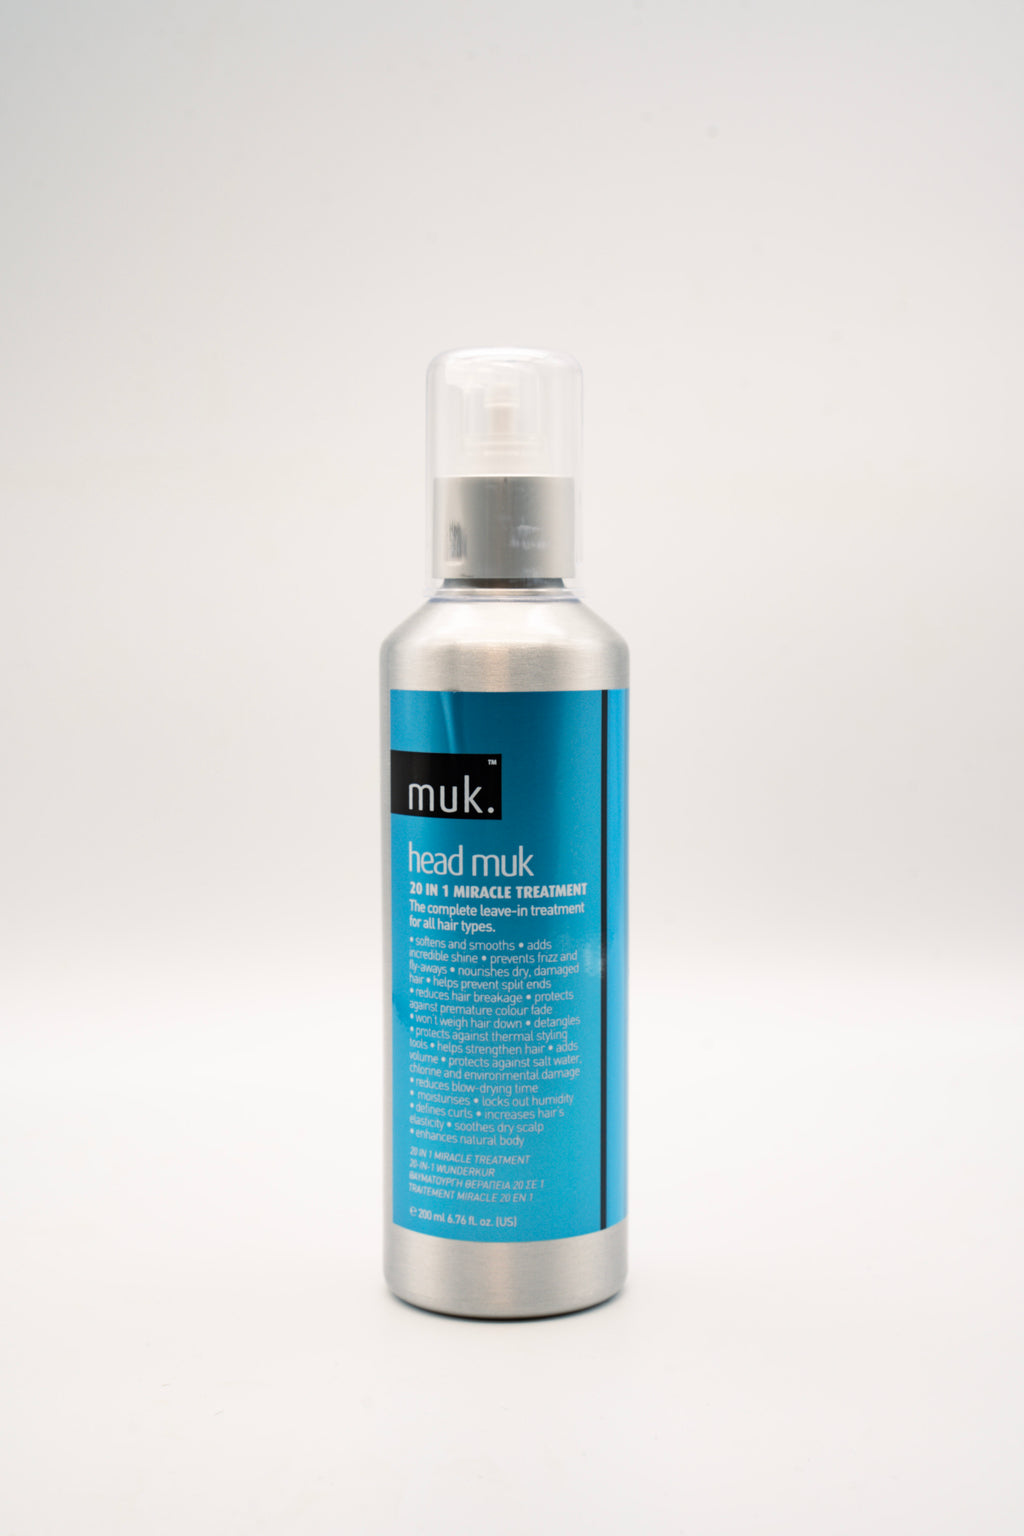 muk. head muk 20 IN 1 MIRACLE TREATMENT